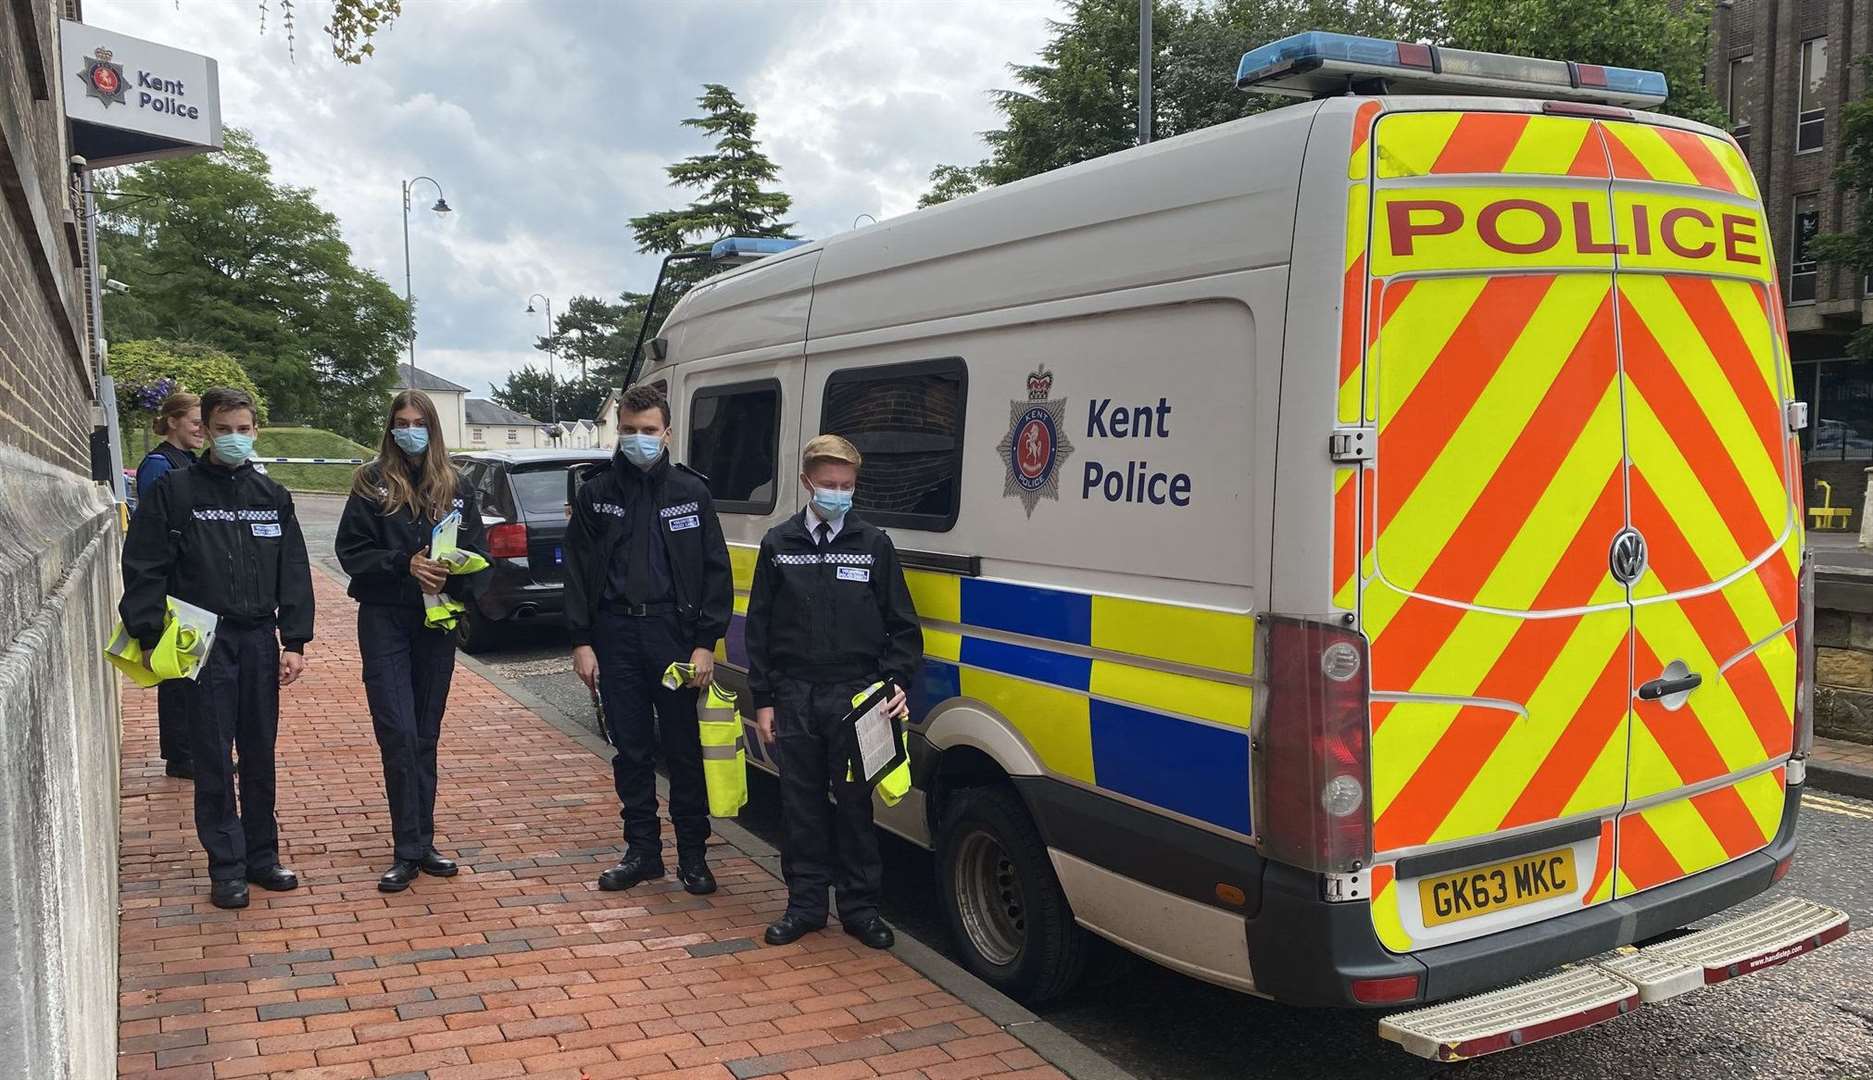 They collected equipment from the town's police station before heading out. Picture: Kent Police